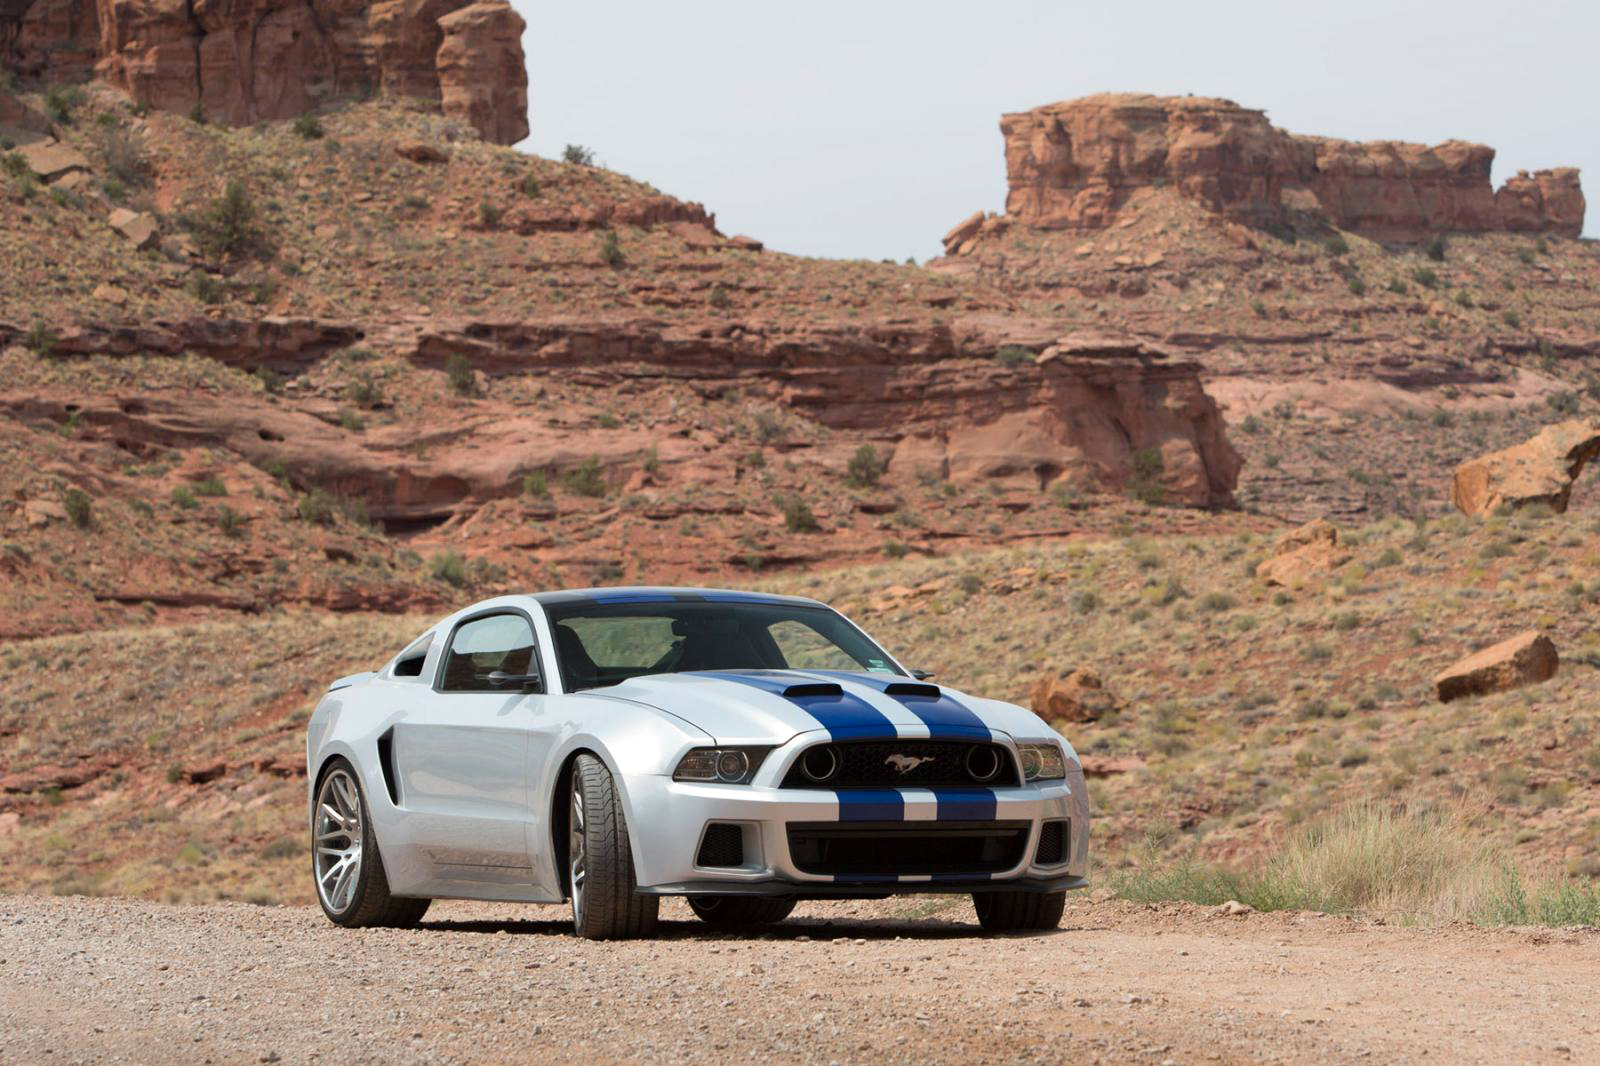 General 1600x1066 car Ford Mustang rocks vehicle silver cars blue Ford rock formation outdoors nature Ford Mustang S-197 II racing stripes muscle cars American cars